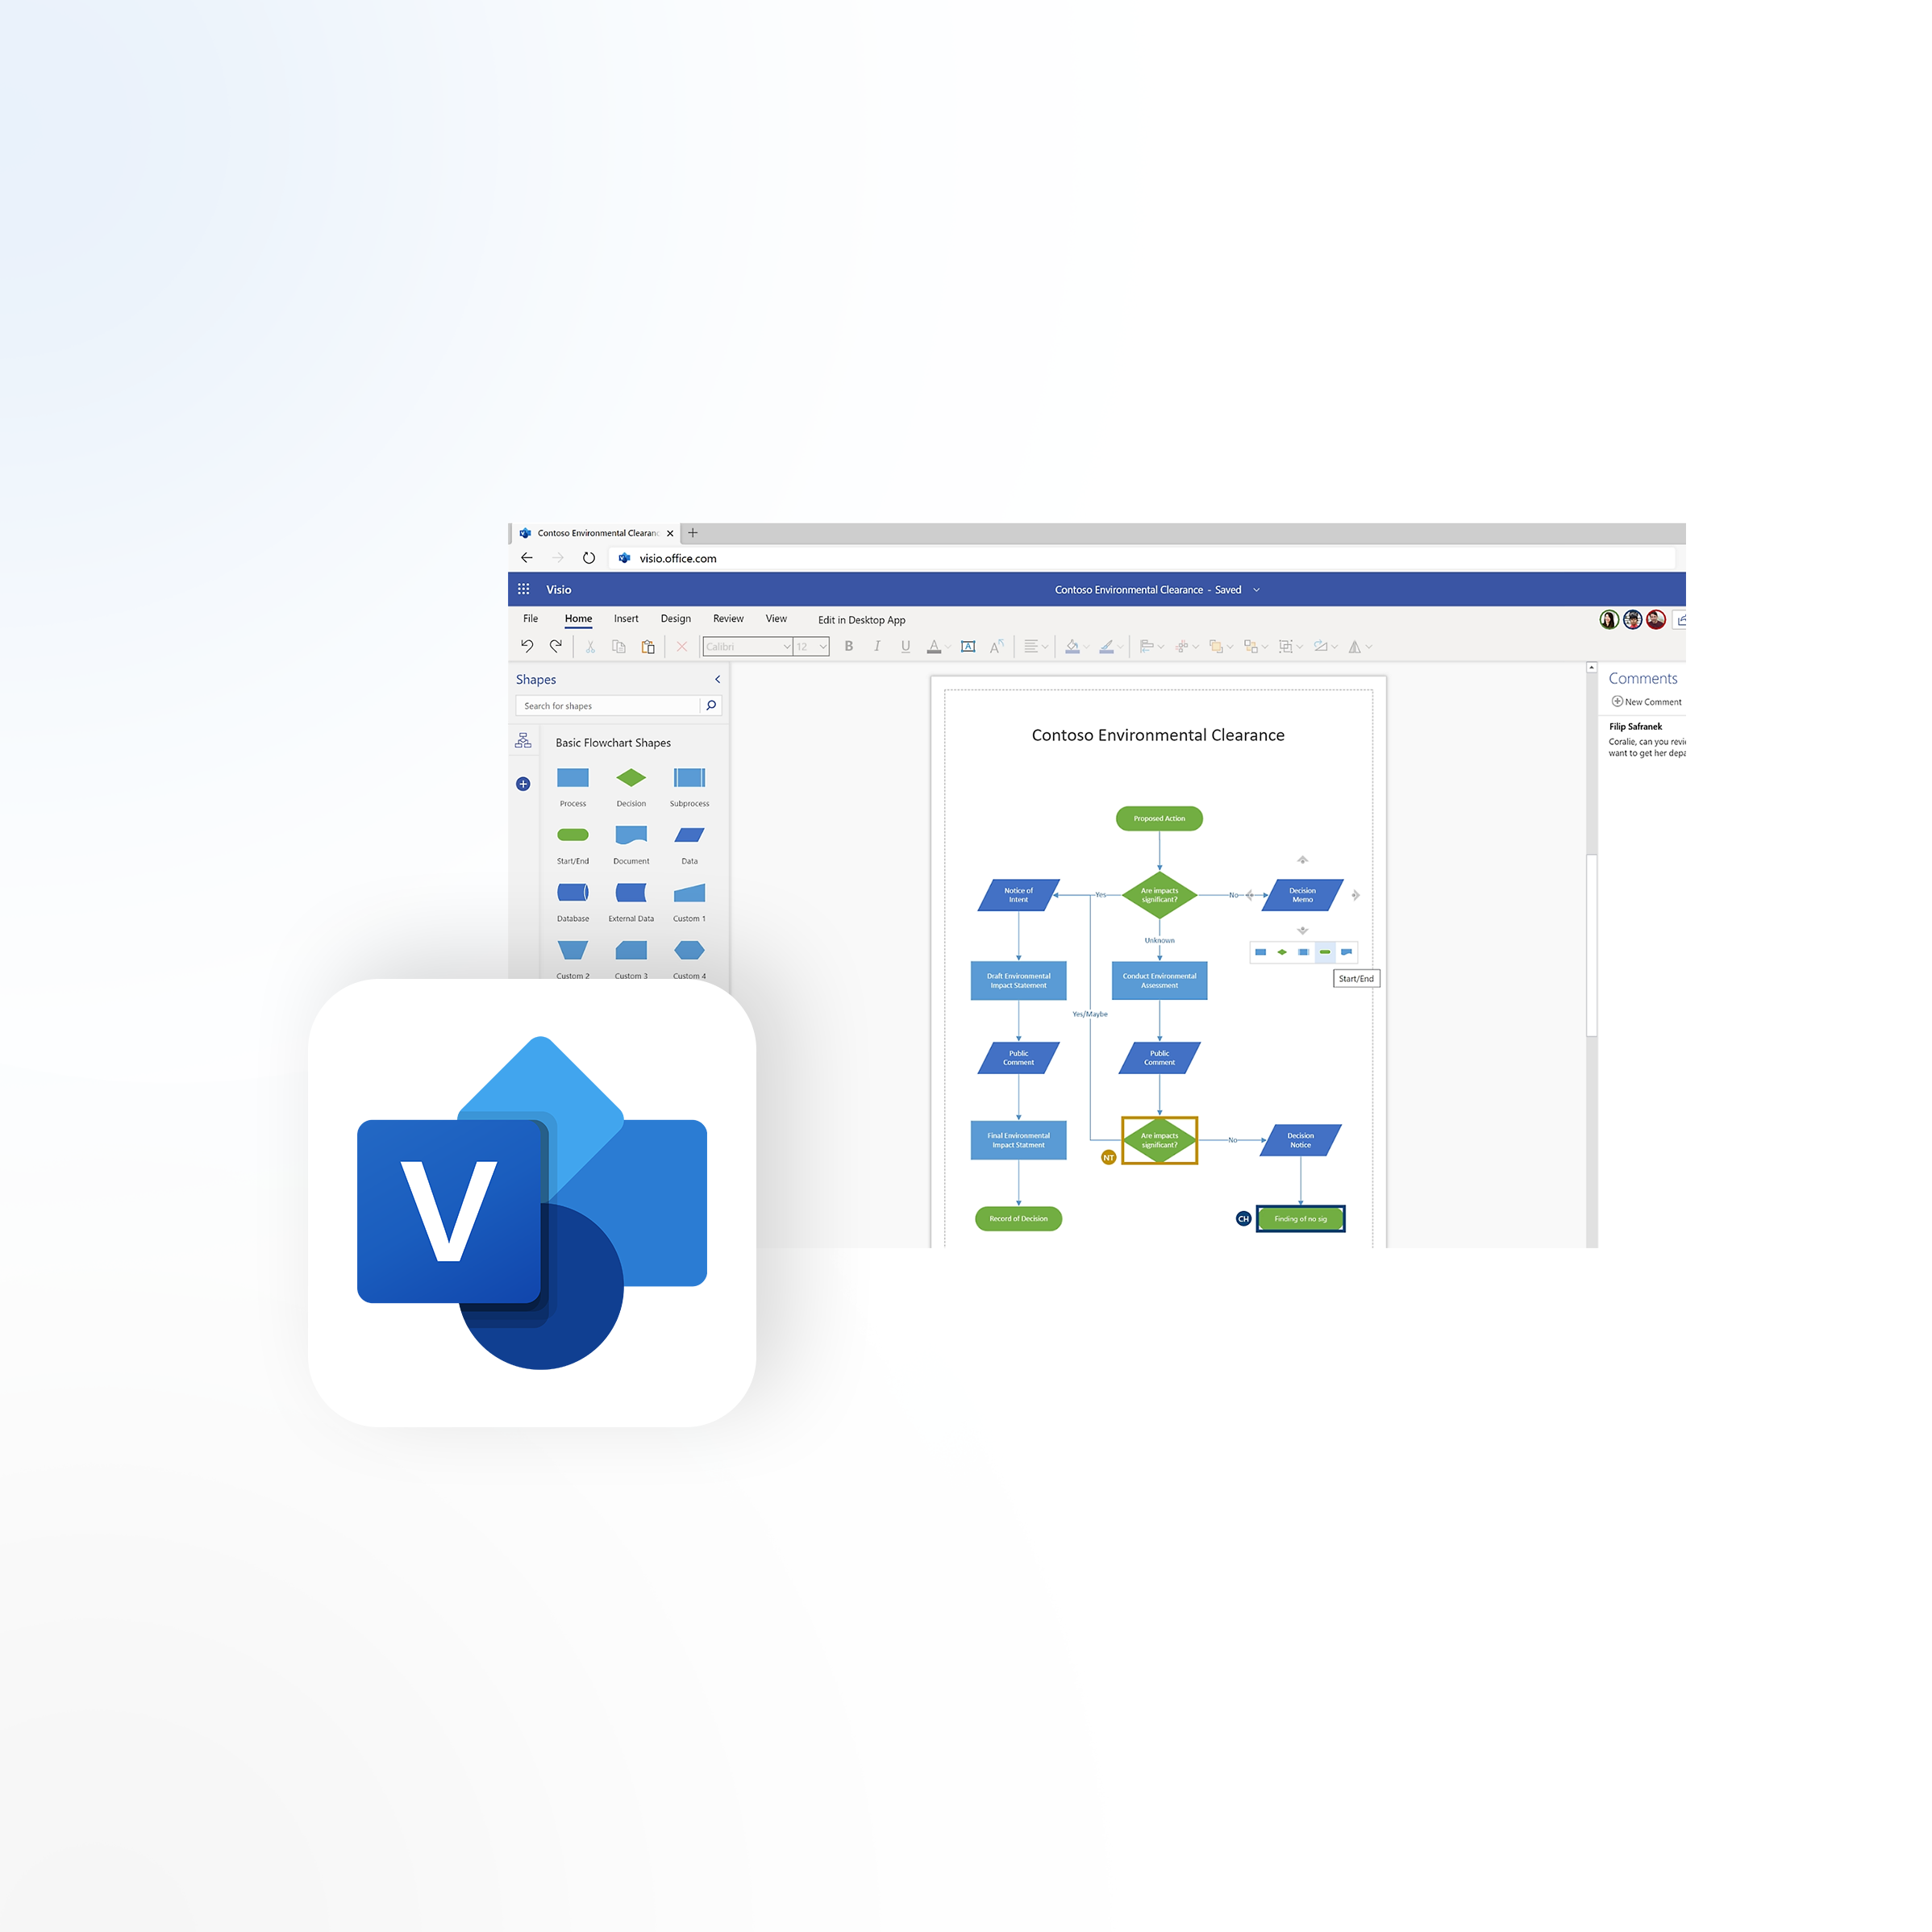 What is Microsoft Visio? What are its uses? Where can I download it?